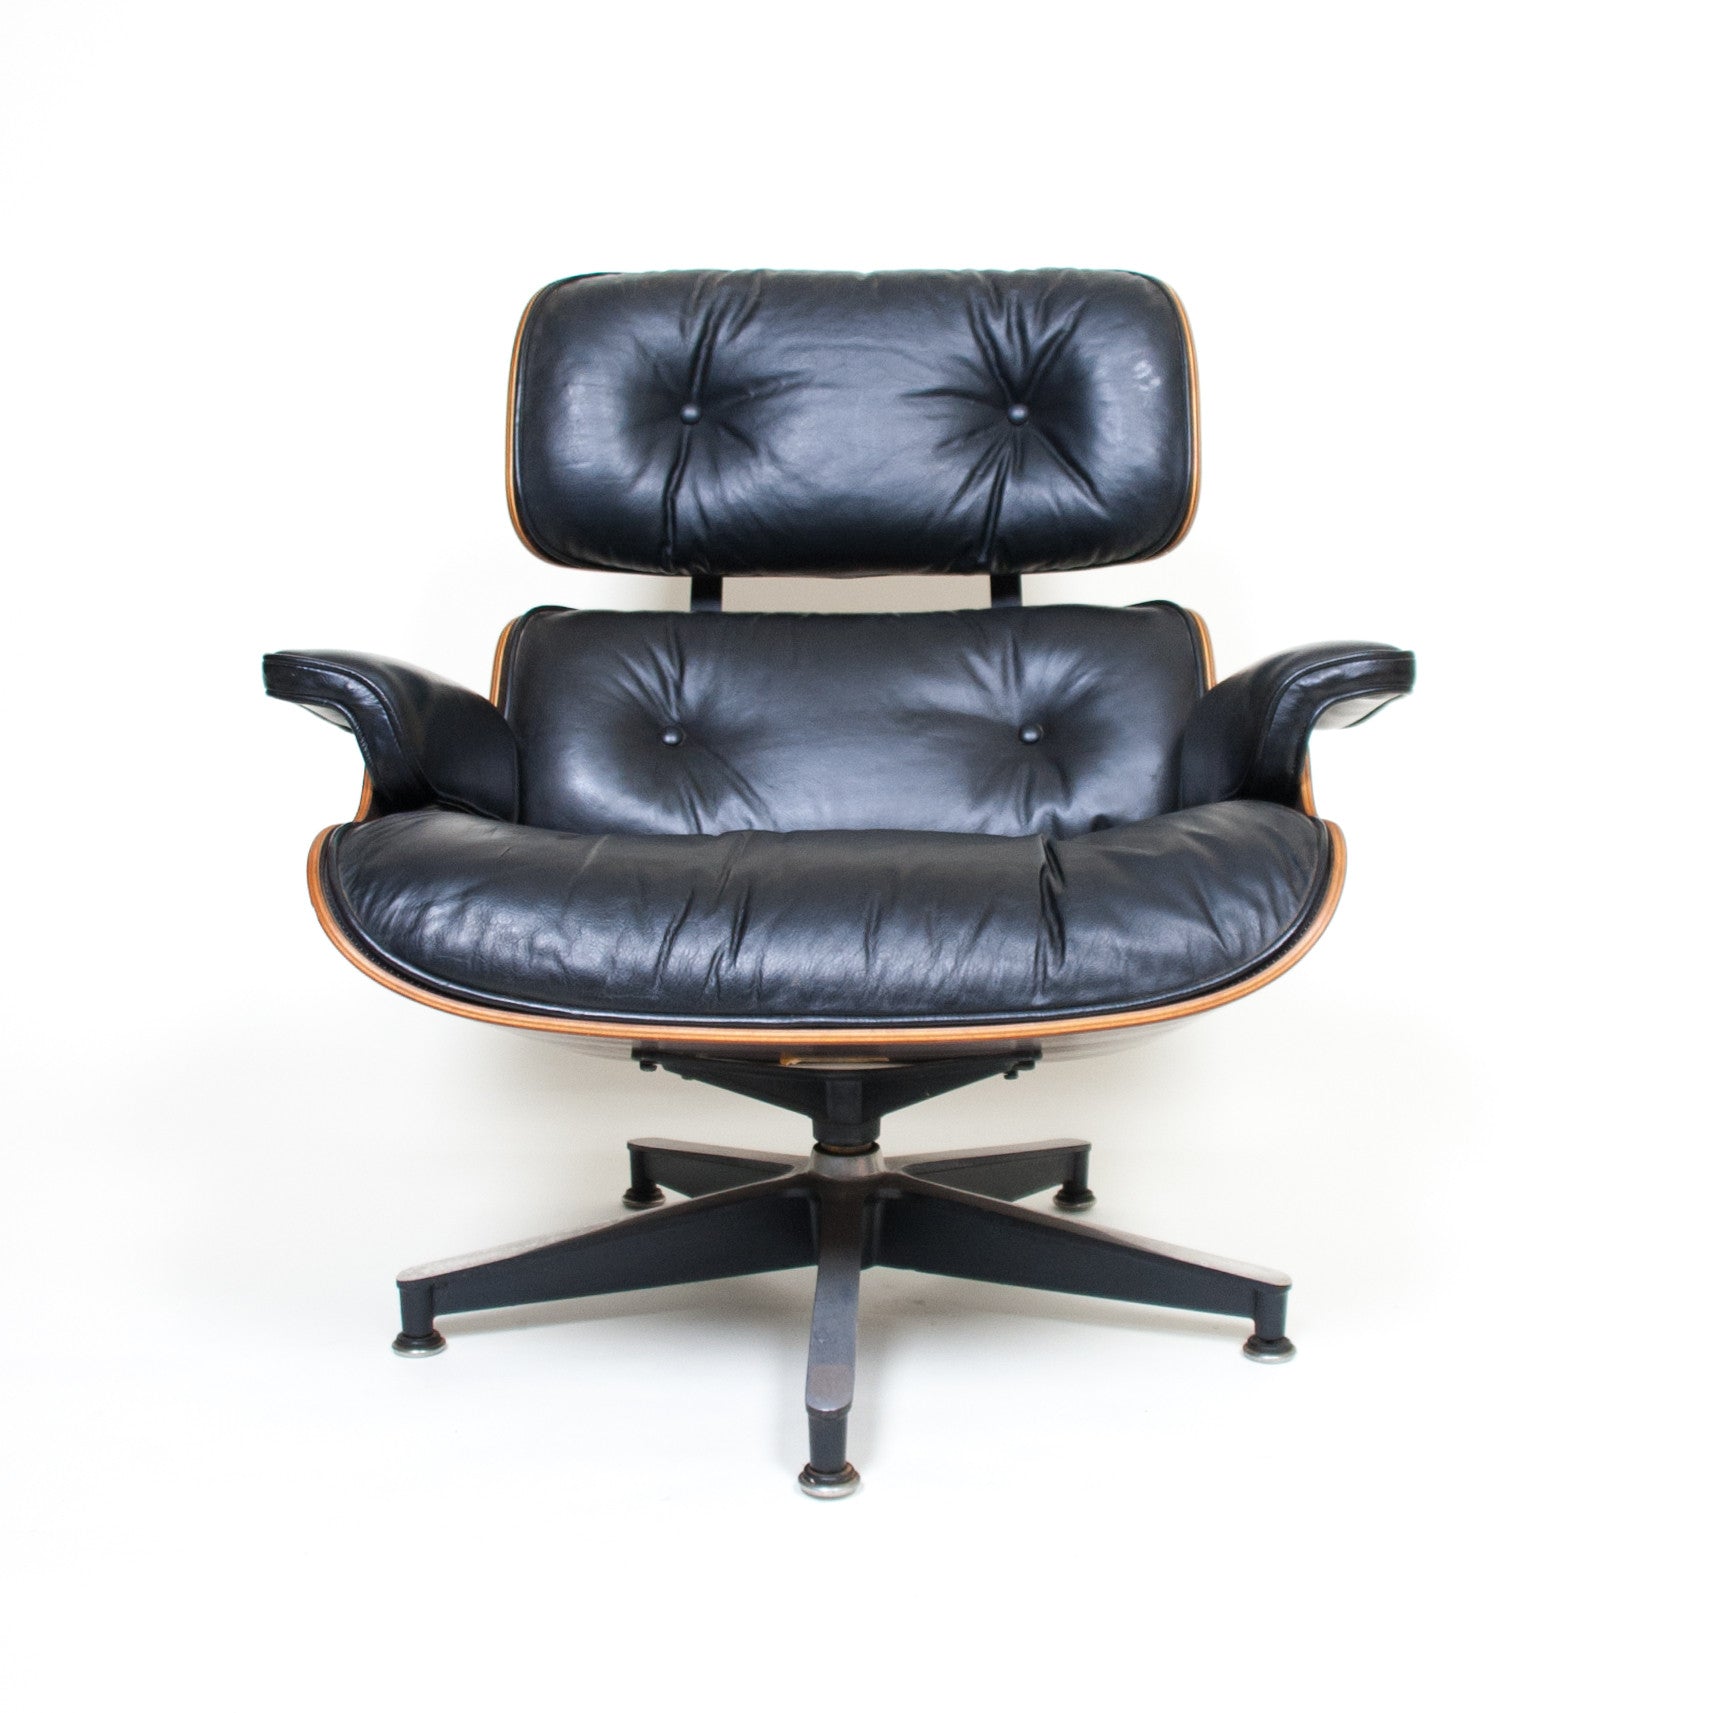 SOLD 1971 Herman Miller Eames Lounge Chair & Ottoman Rosewood 670 671